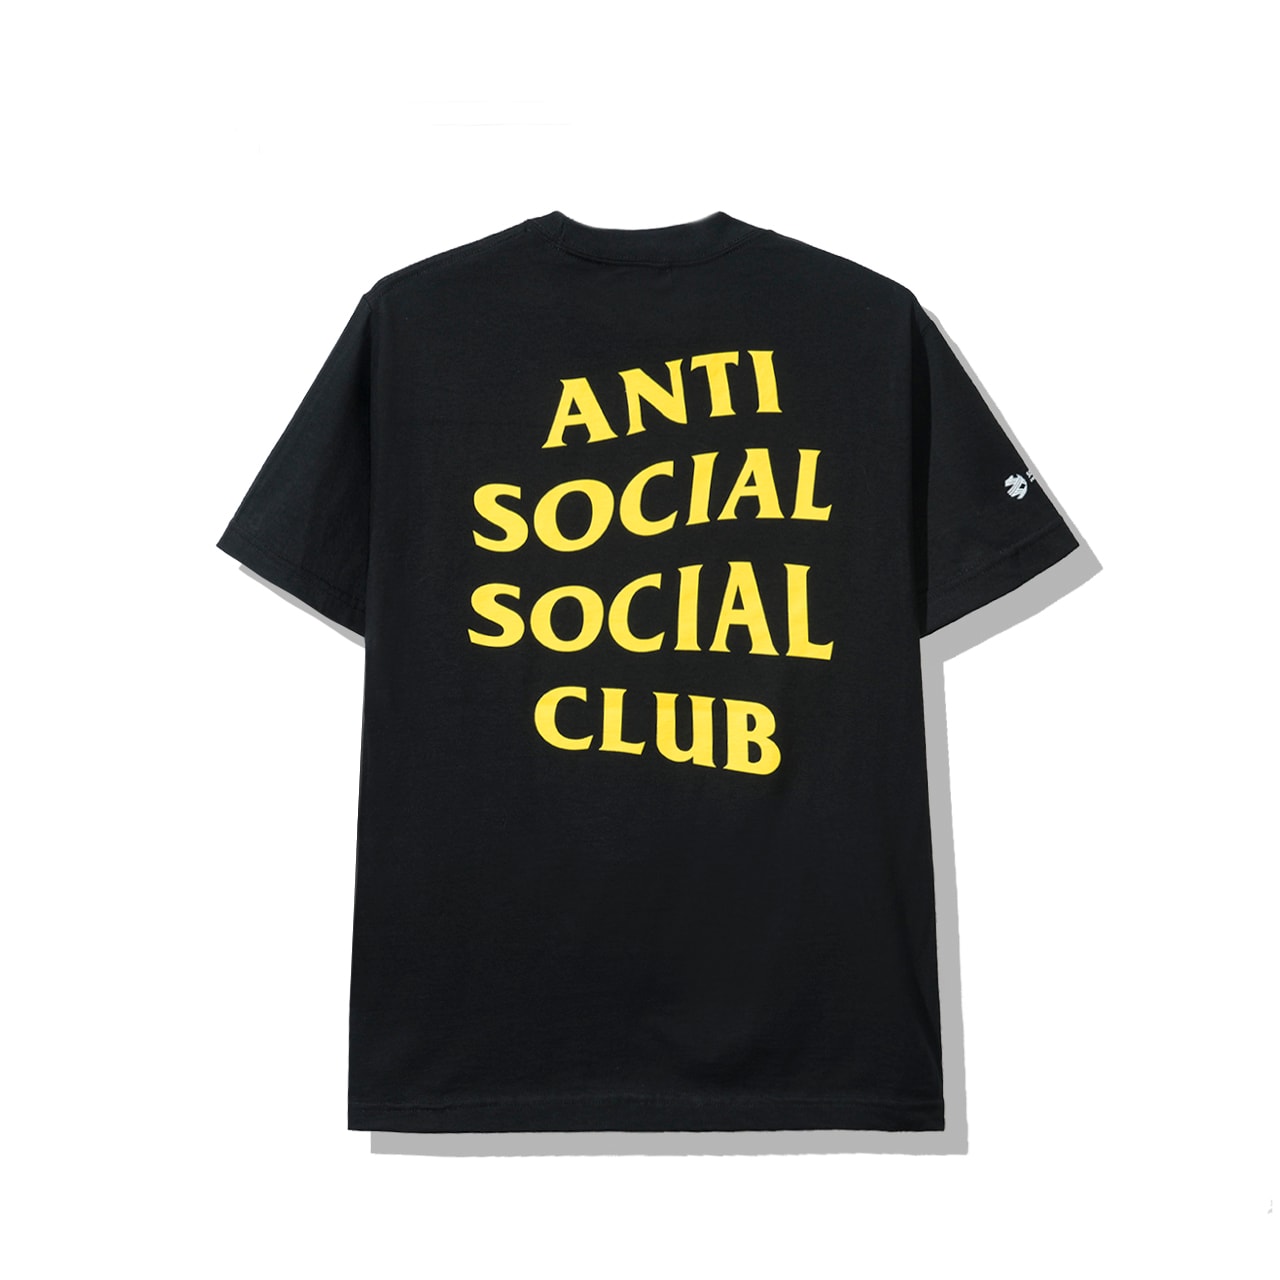 Anti Social Social Club DHL Clothing Collaboration capsule september 25 2019 release date info buy drop hoodie pillow cushion shipping yellow red logo